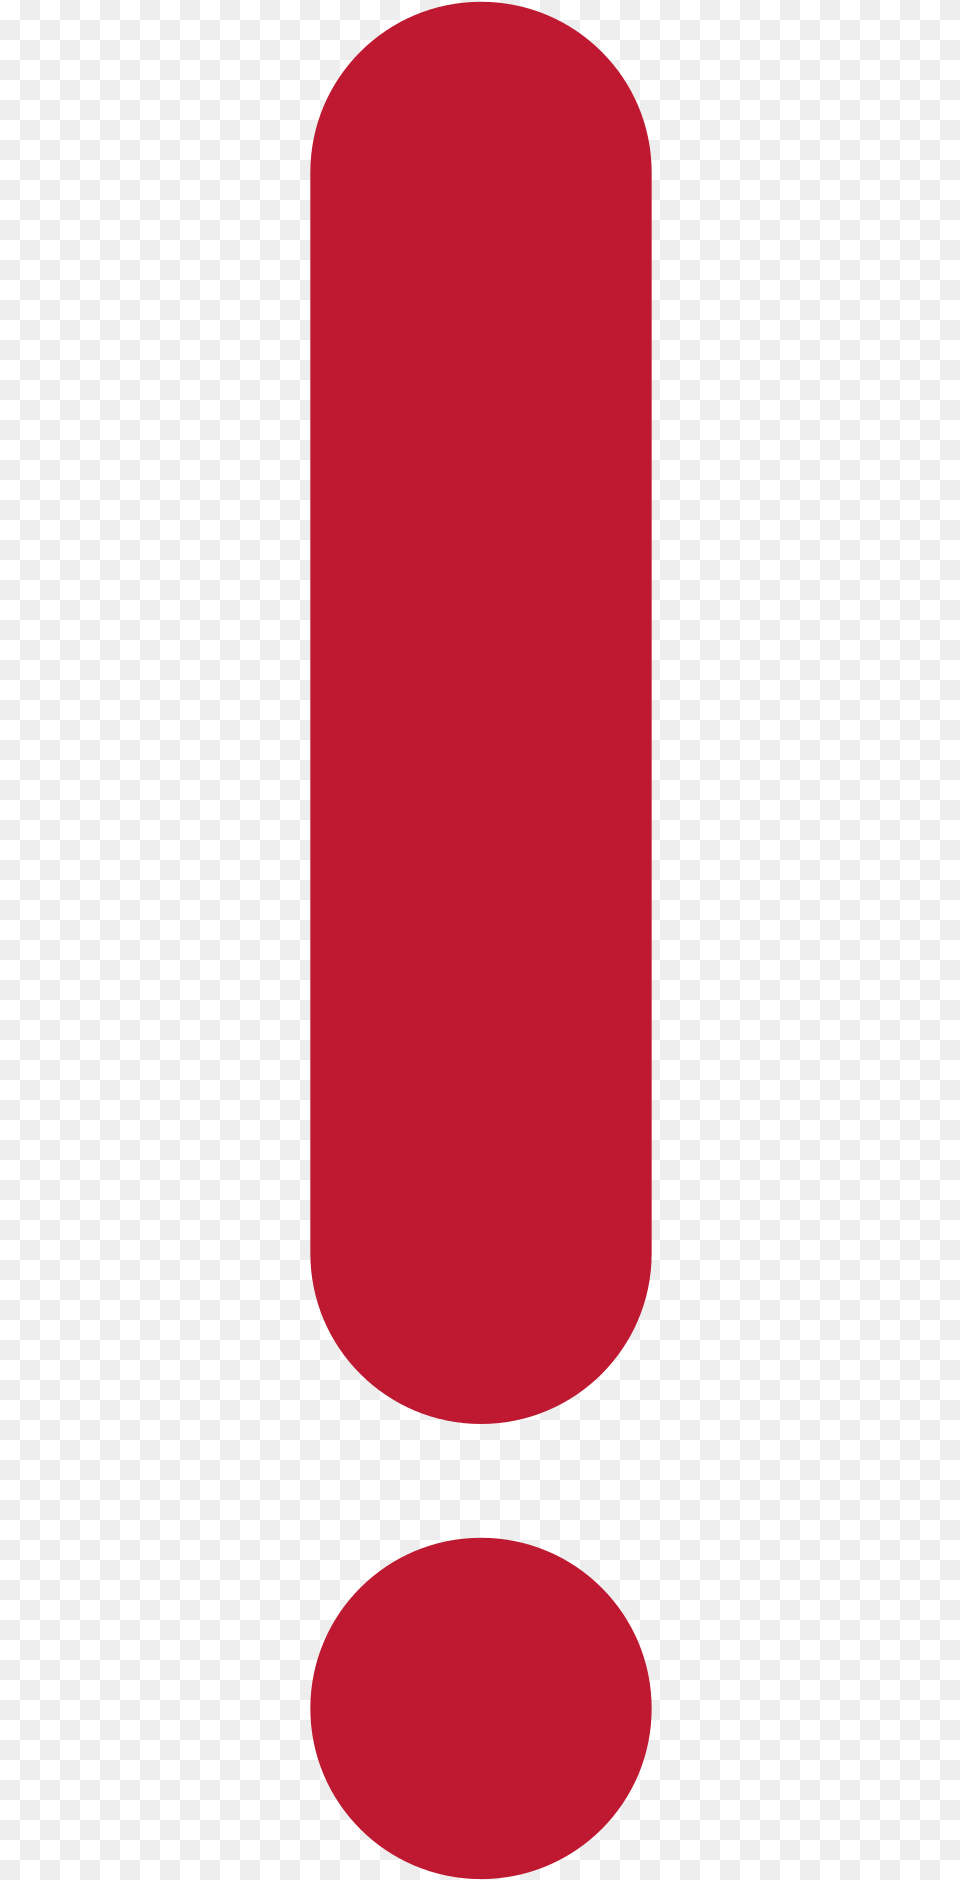 Red Exclamation Mark Symbol Point D Exclamation Rouge, Lamp, Lampshade Png Image